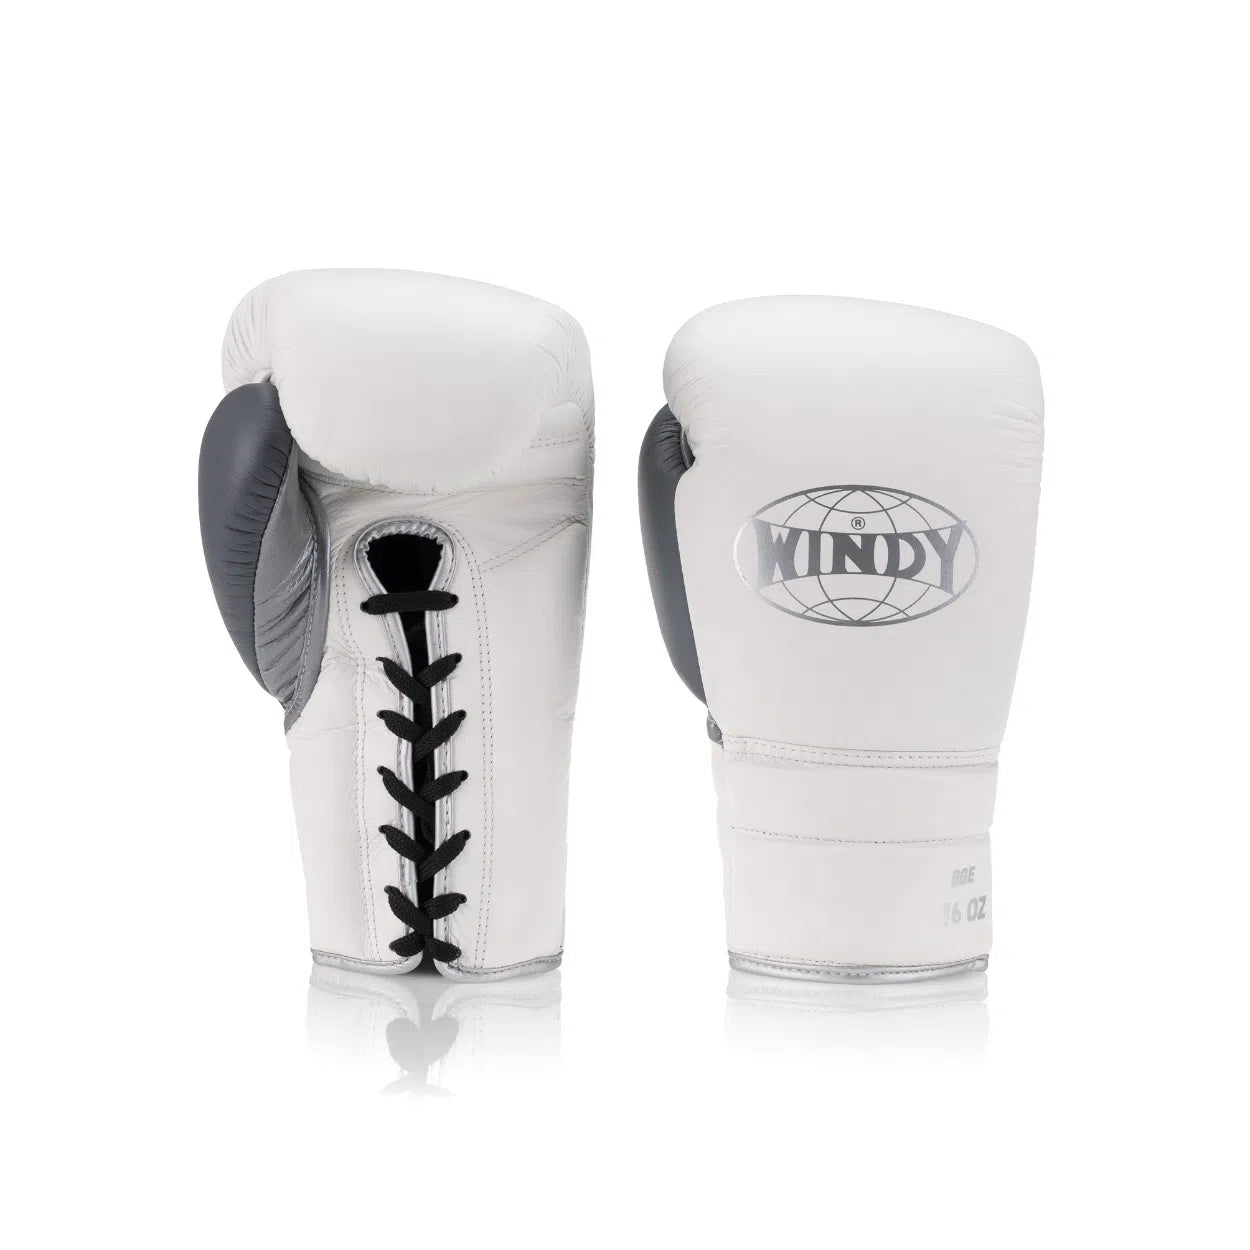 Elite Series Lace-up Boxing Glove - White/Silver/Grey